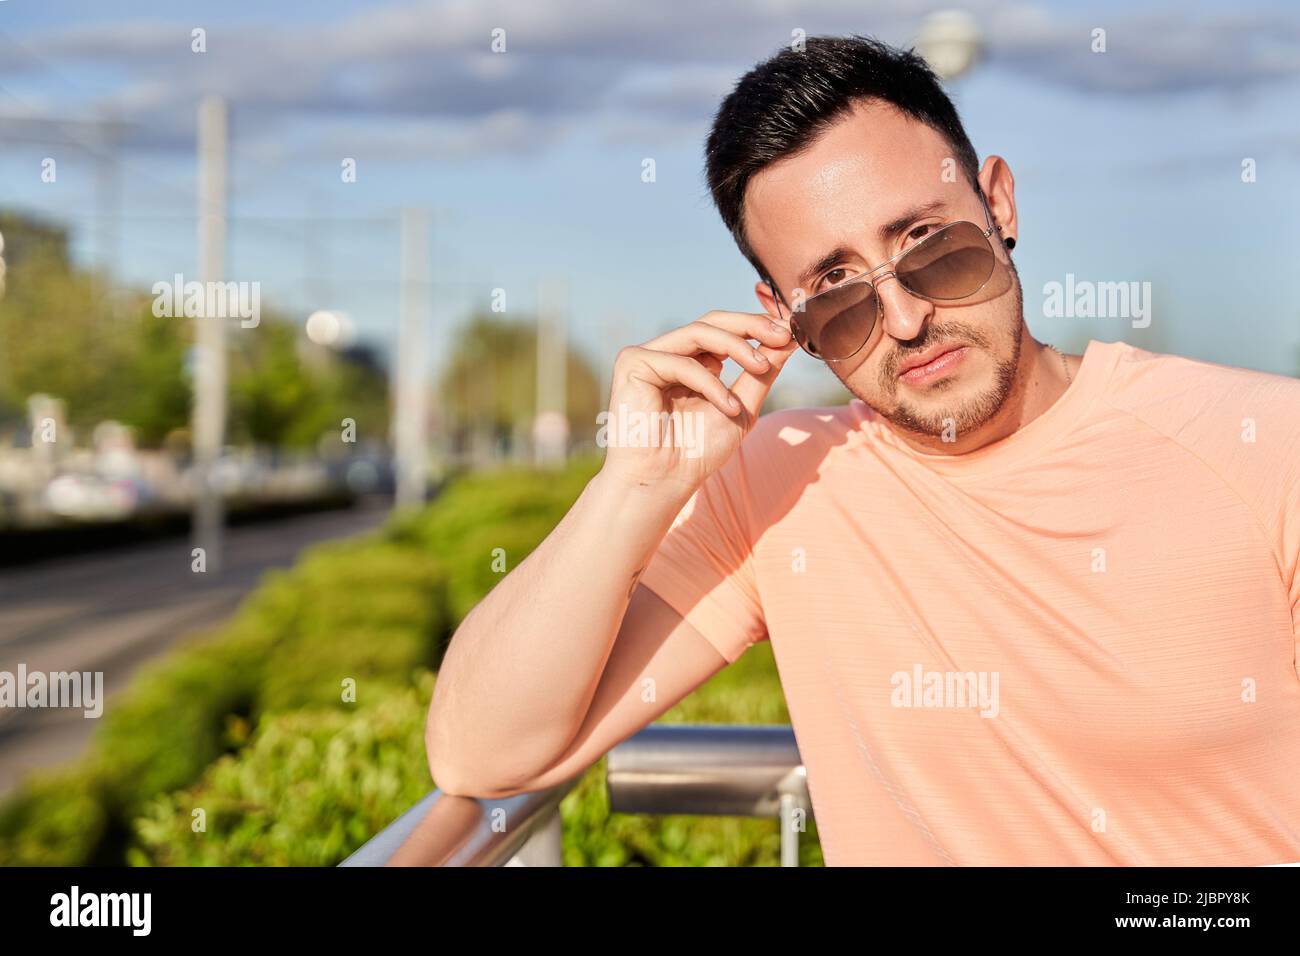 Serious young man looking at the camera over sunglasses on a sunny day on a city street. Stock Photo